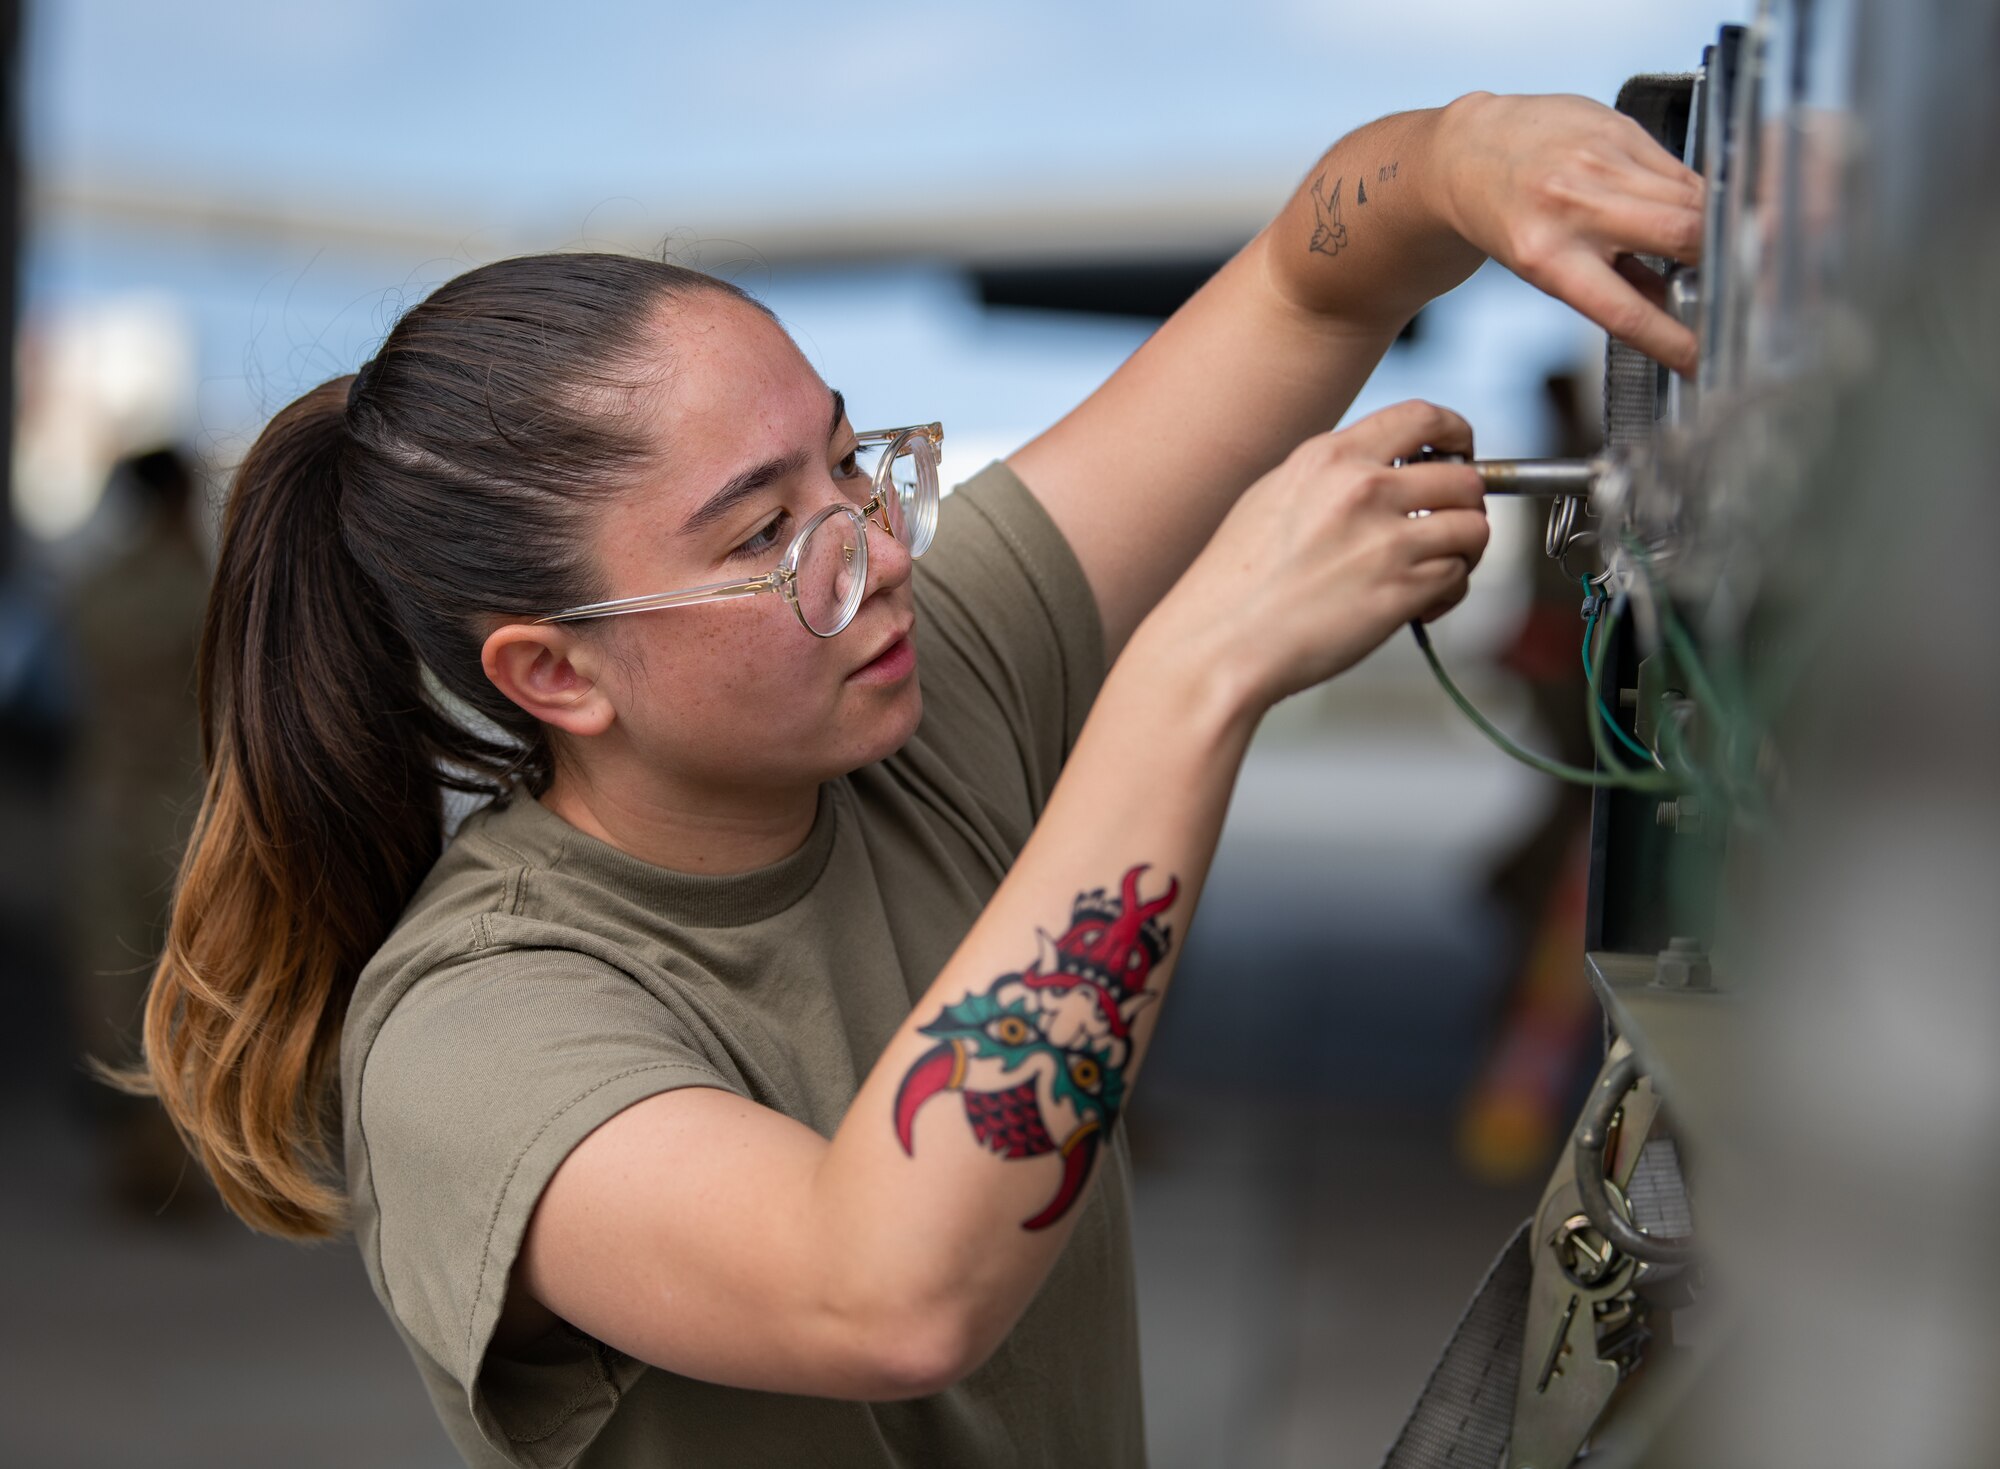 An Airman replaces holding pins in a trailer